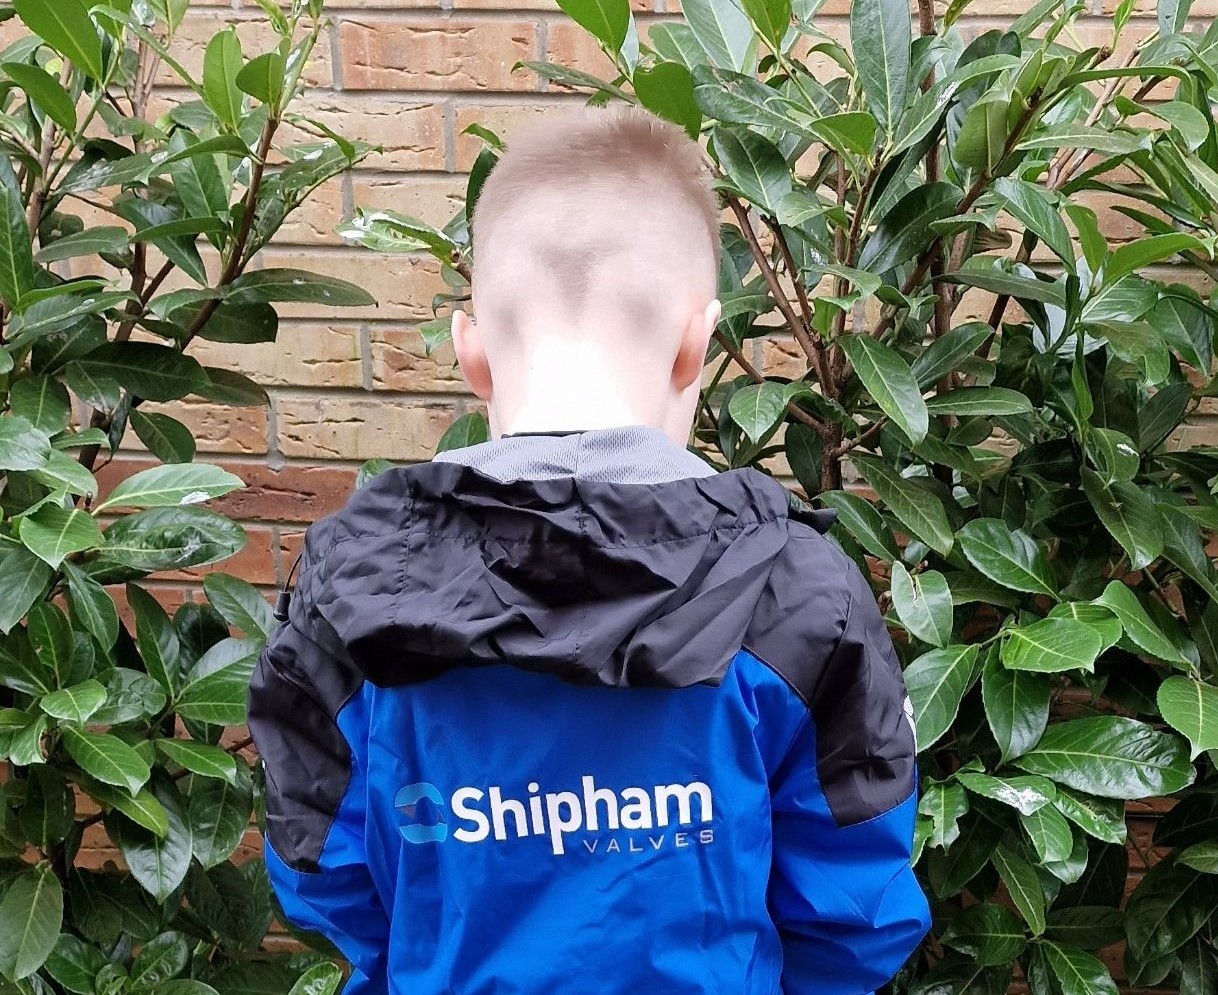 Shipham Valves supports local U7's Football Team Beverley Town Jets with shirt sponsorship